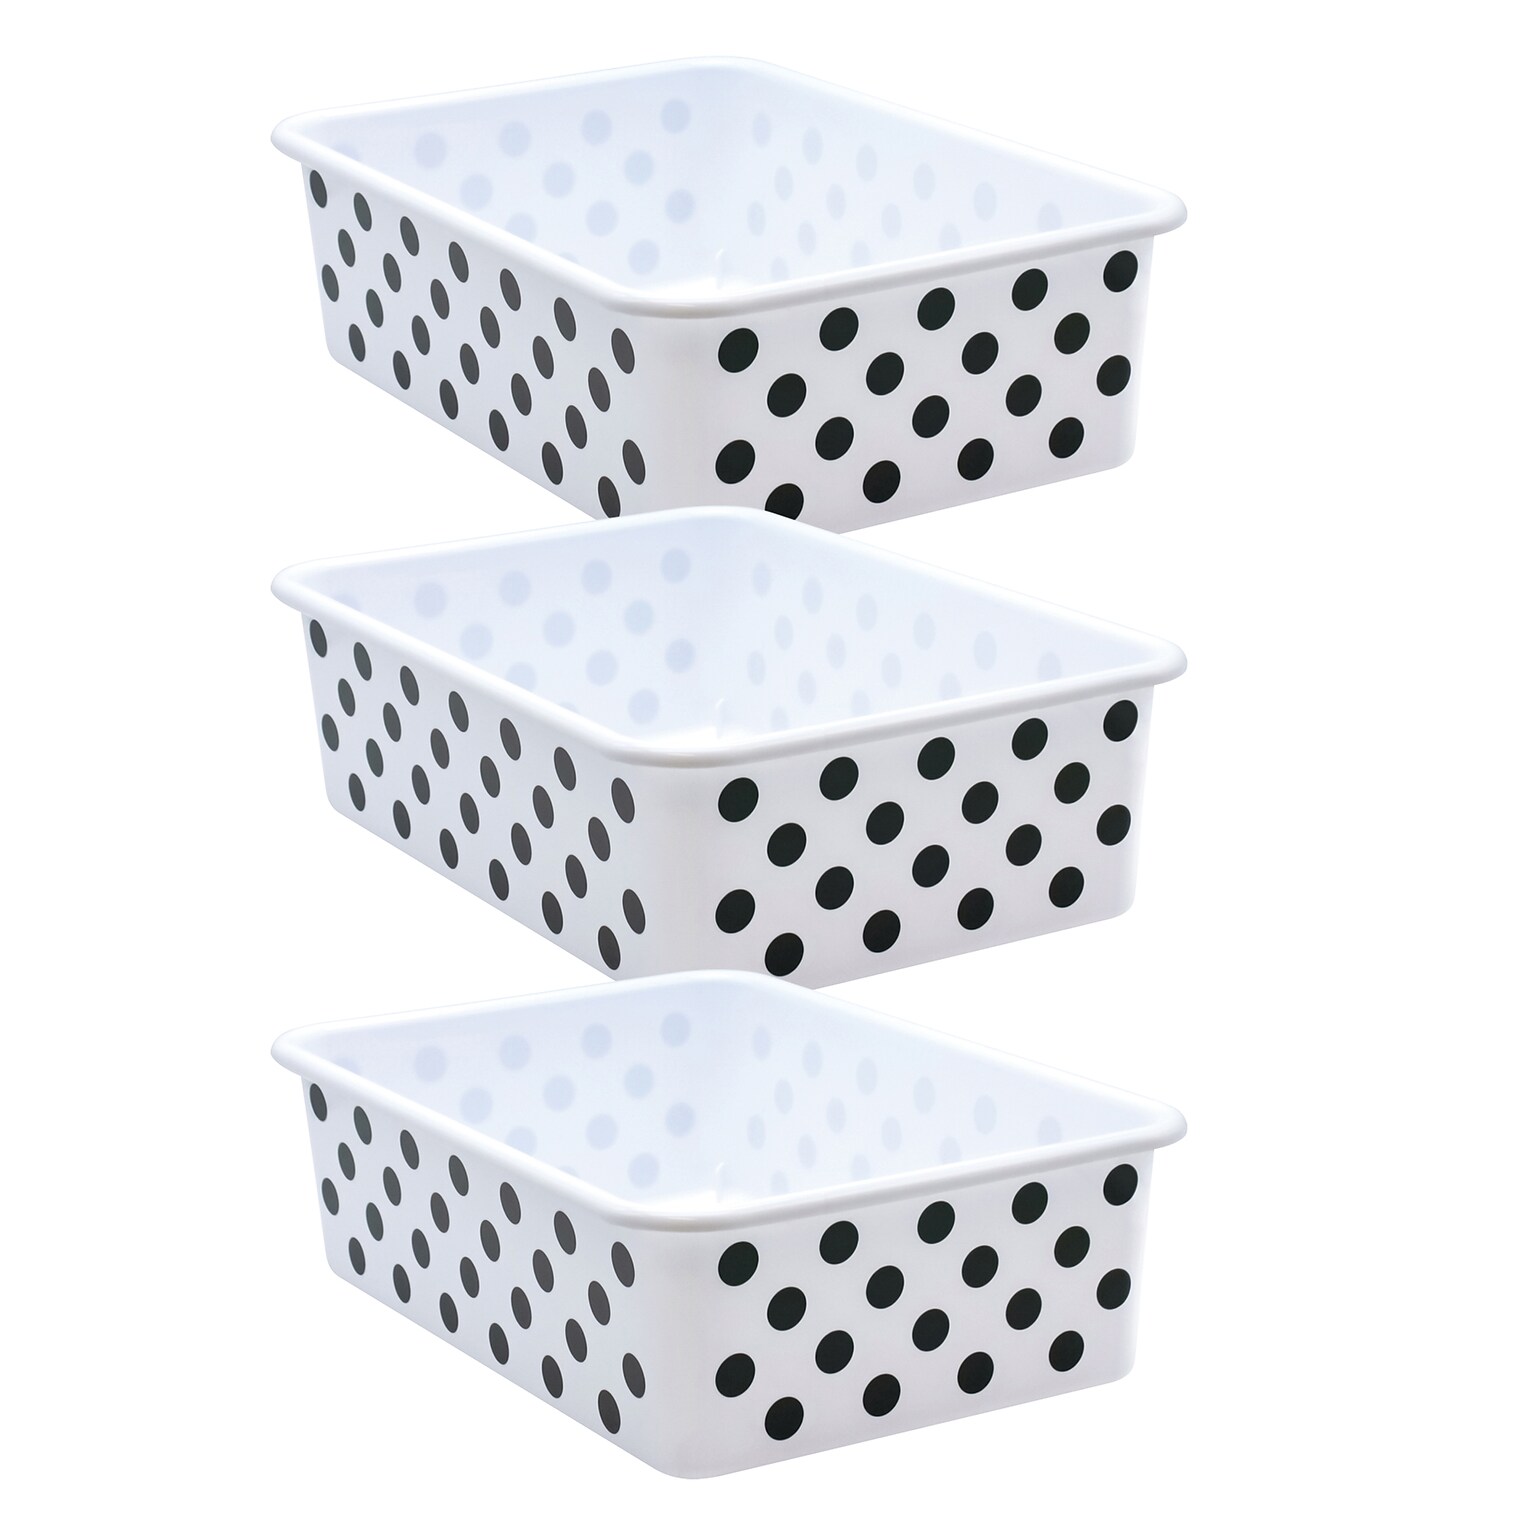 Teacher Created Resources® Plastic Storage Bin, Large, 16.25 x 11.5 x 5, Black Polka Dots on White, Pack of 3 (TCR20419-3)